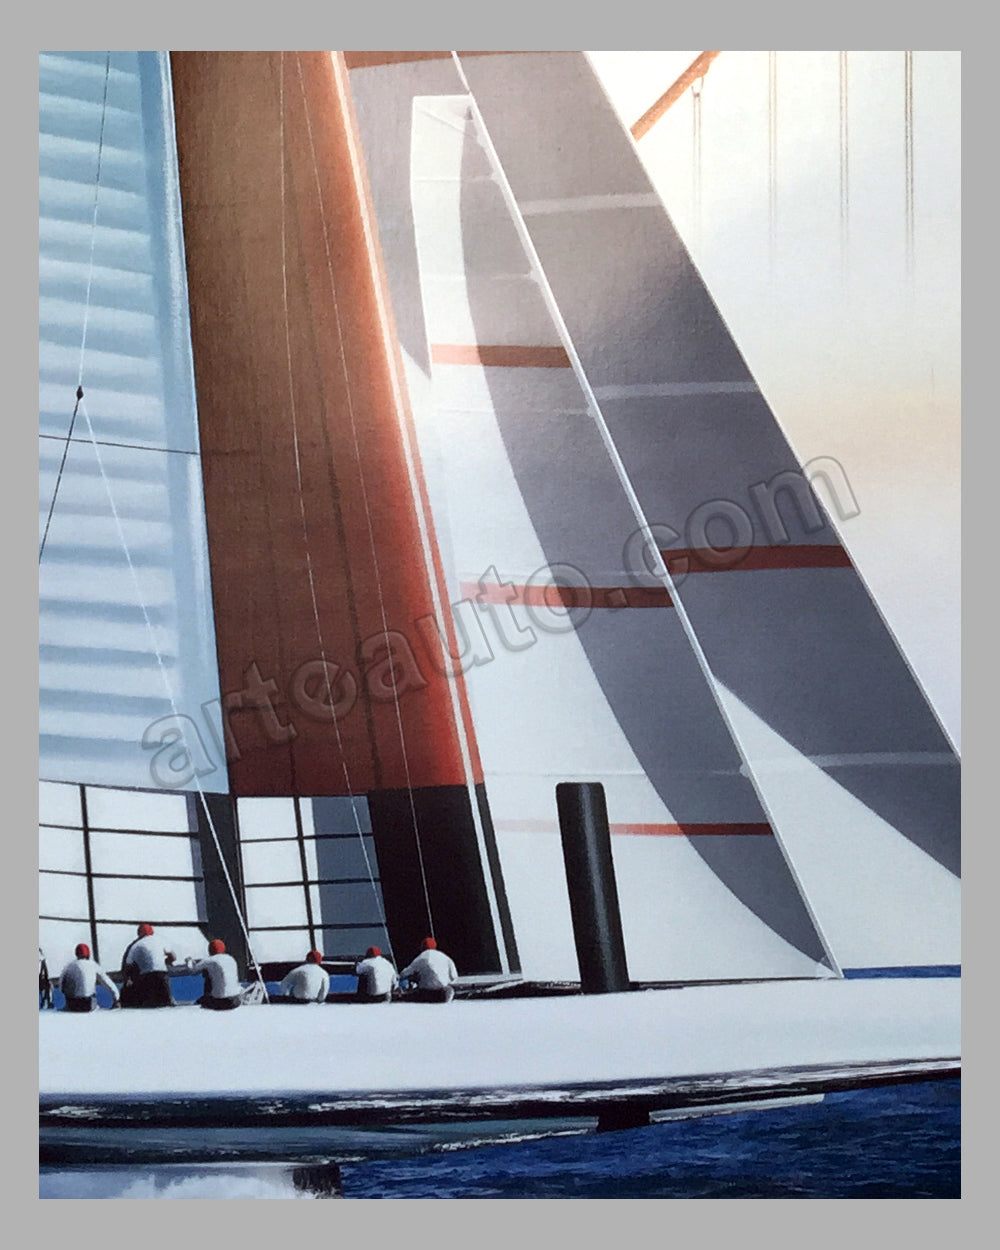 Louis Vuitton Cup, San Francisco, 2013 poster by Razzia Temporarily Out of  Stock$425.00